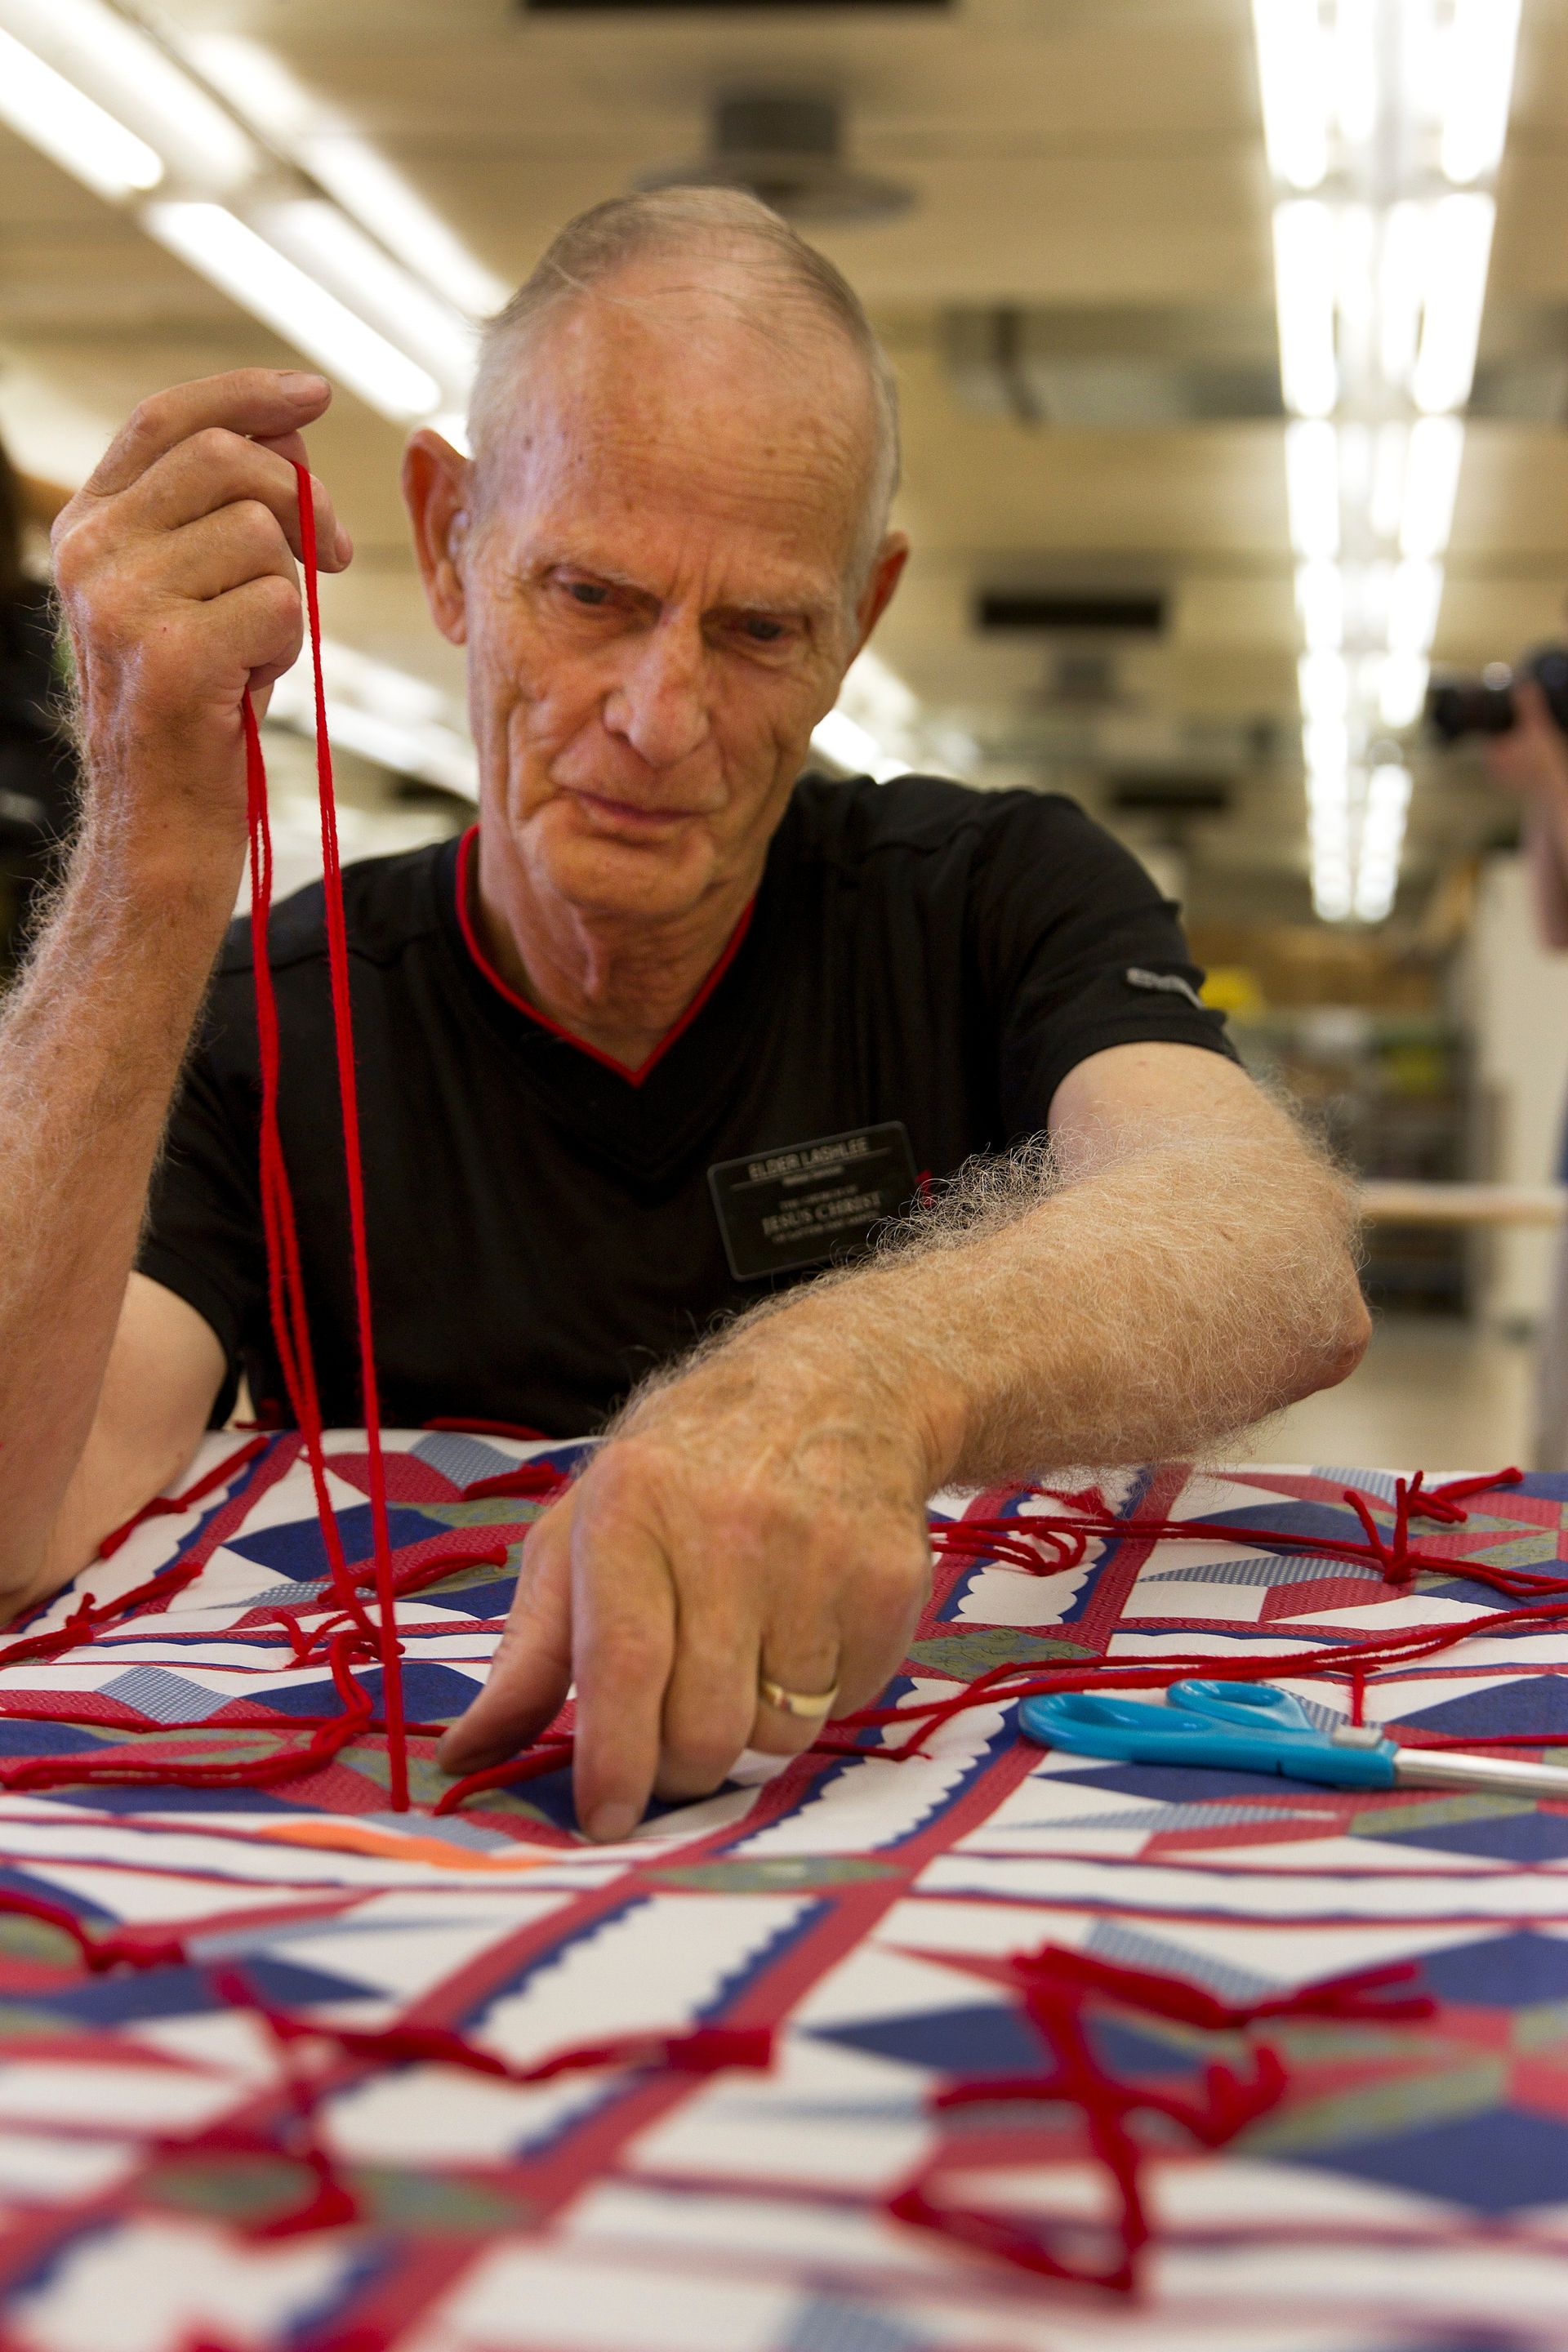 A senior missionary helps tie a quilt at a humanitarian center.